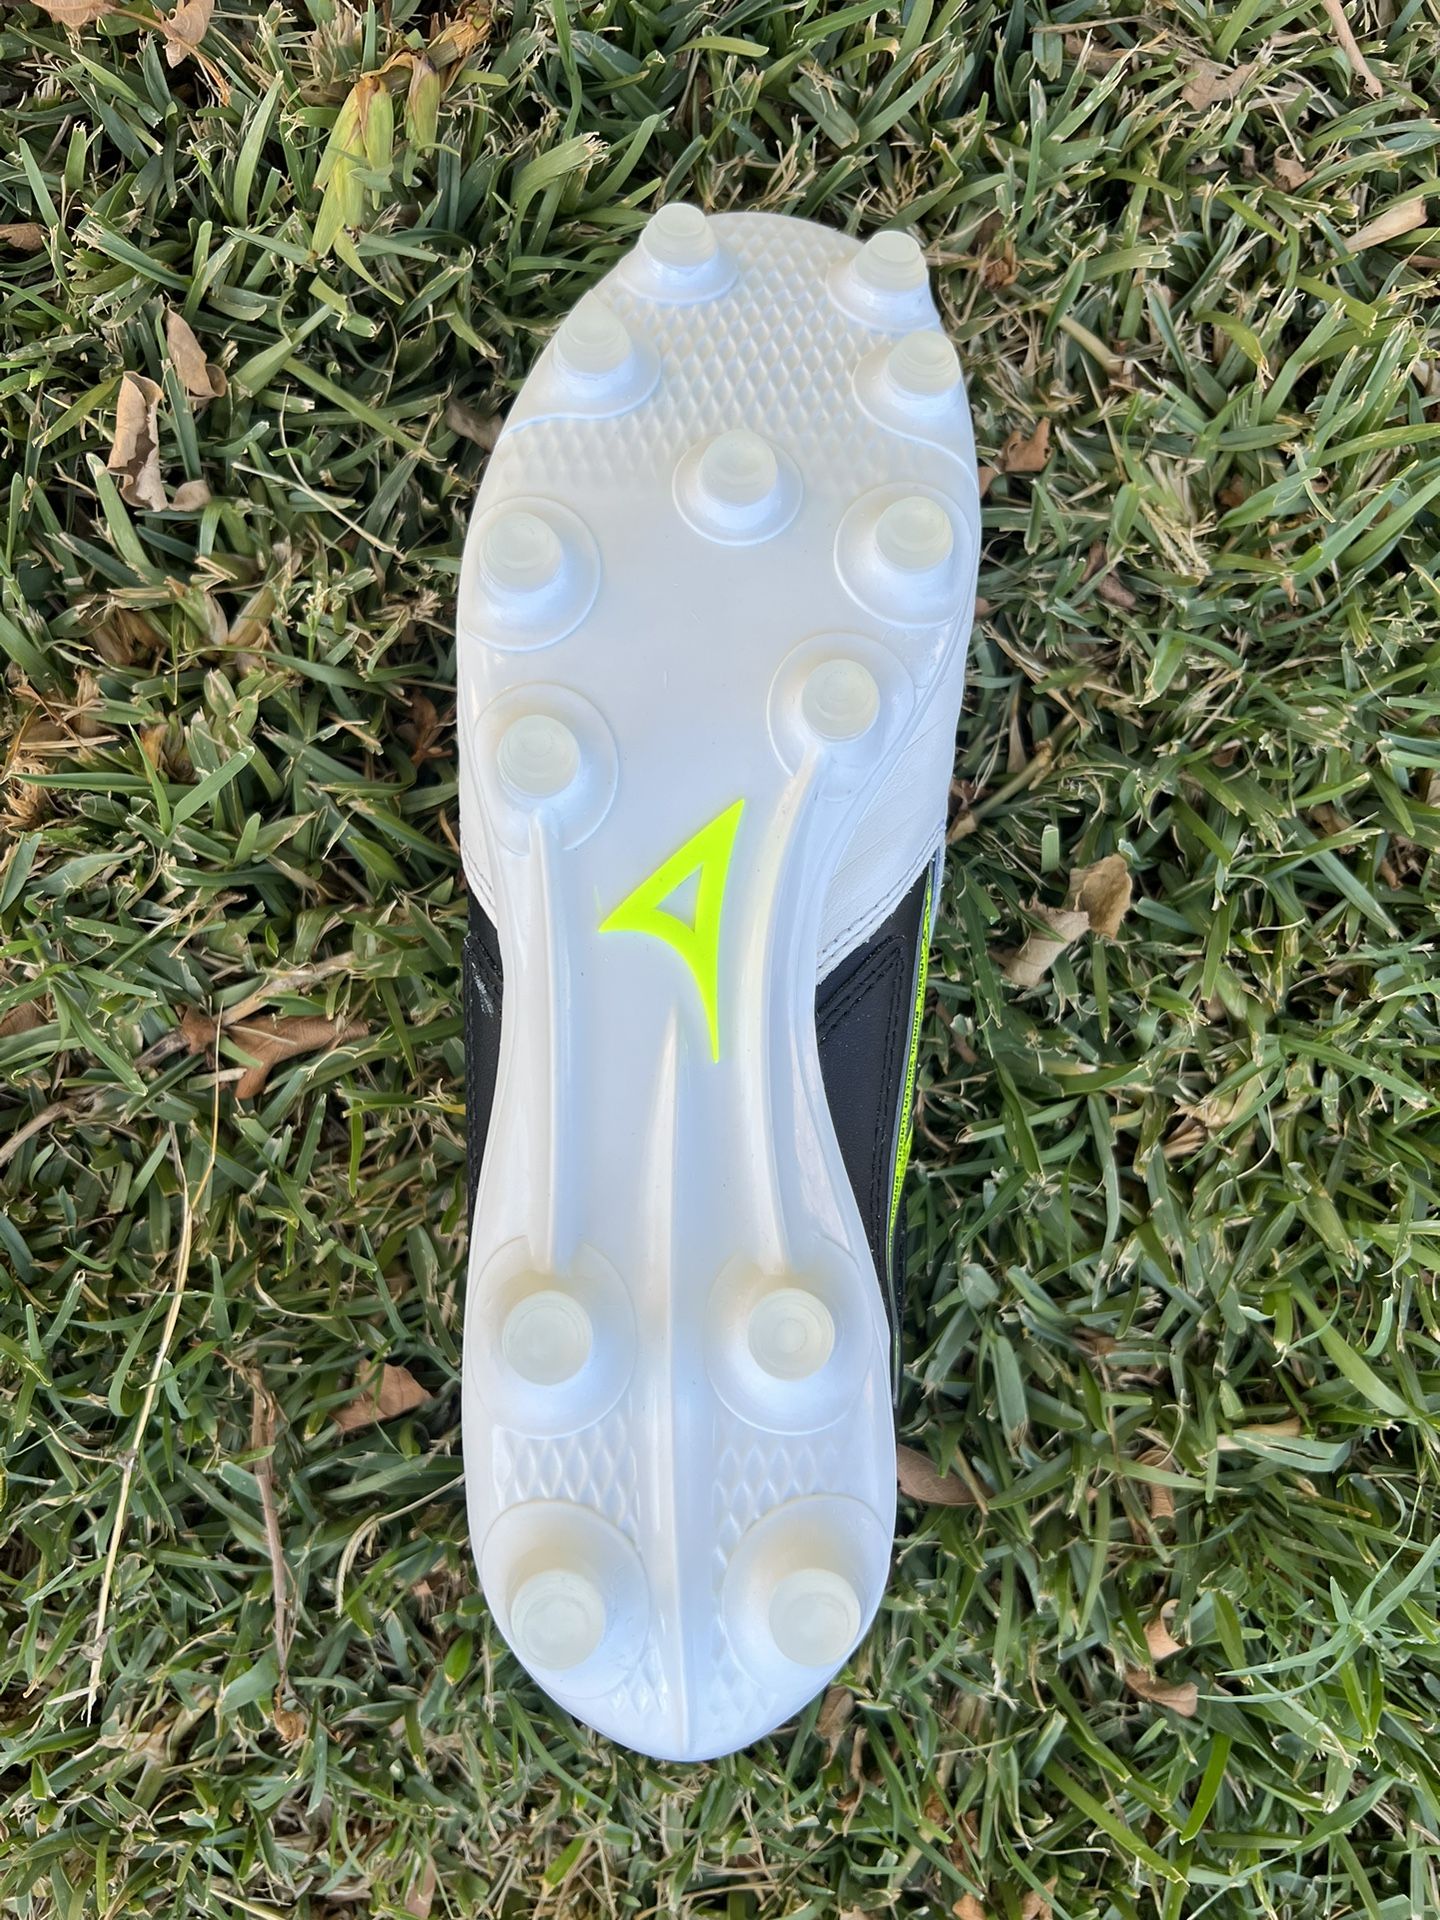 Pirma Supreme Pro Soccer Cleats Neon Green Sizes Limited for Sale in Buena  Park, CA - OfferUp